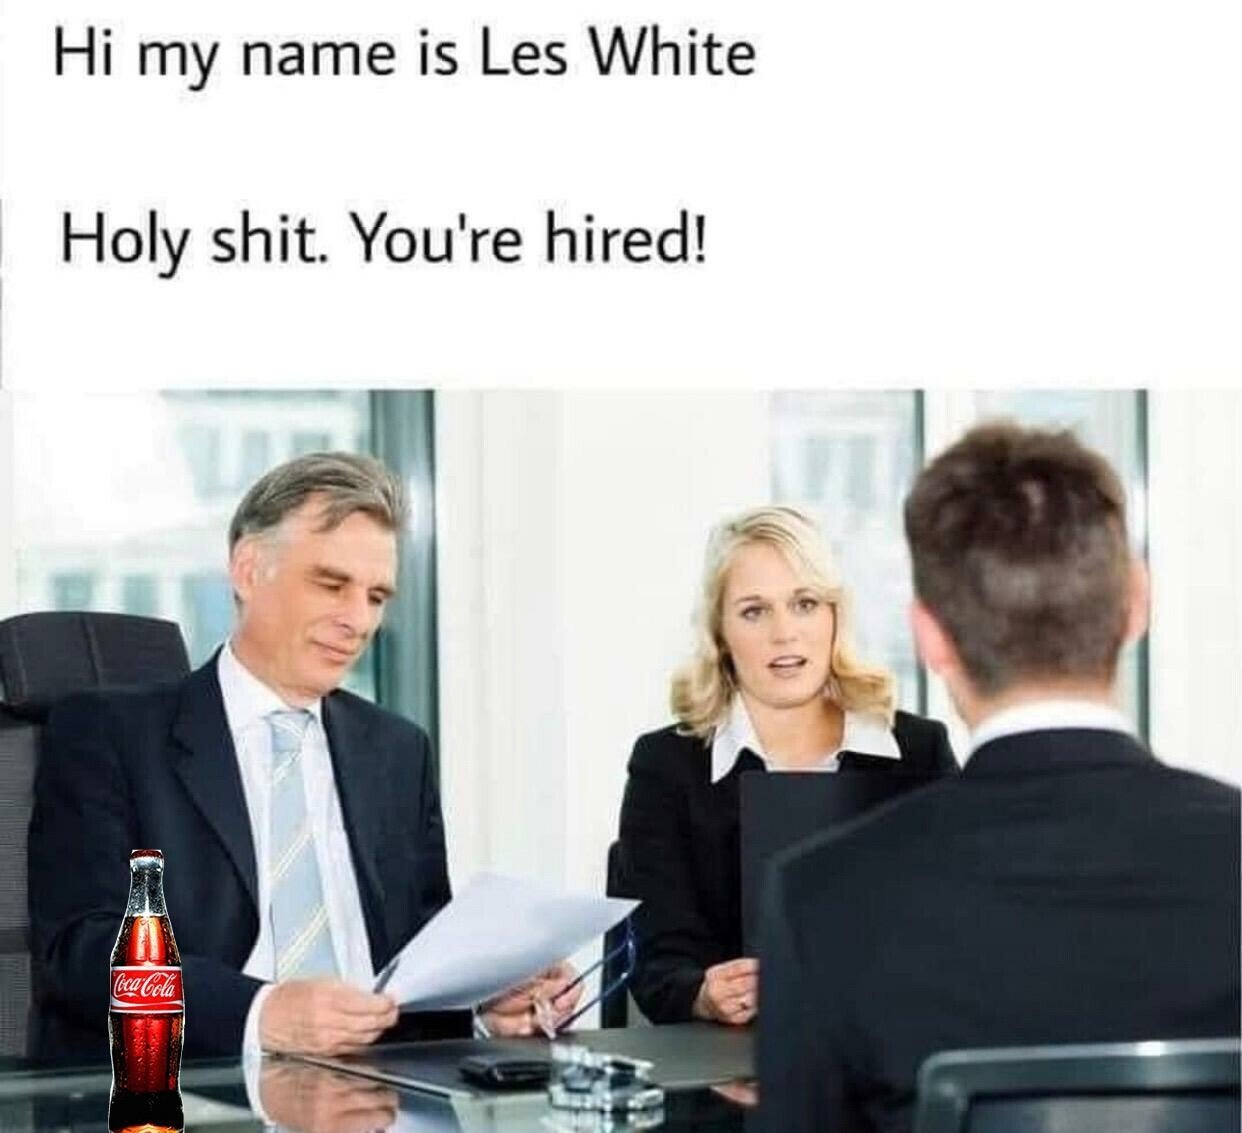 My name is Less White